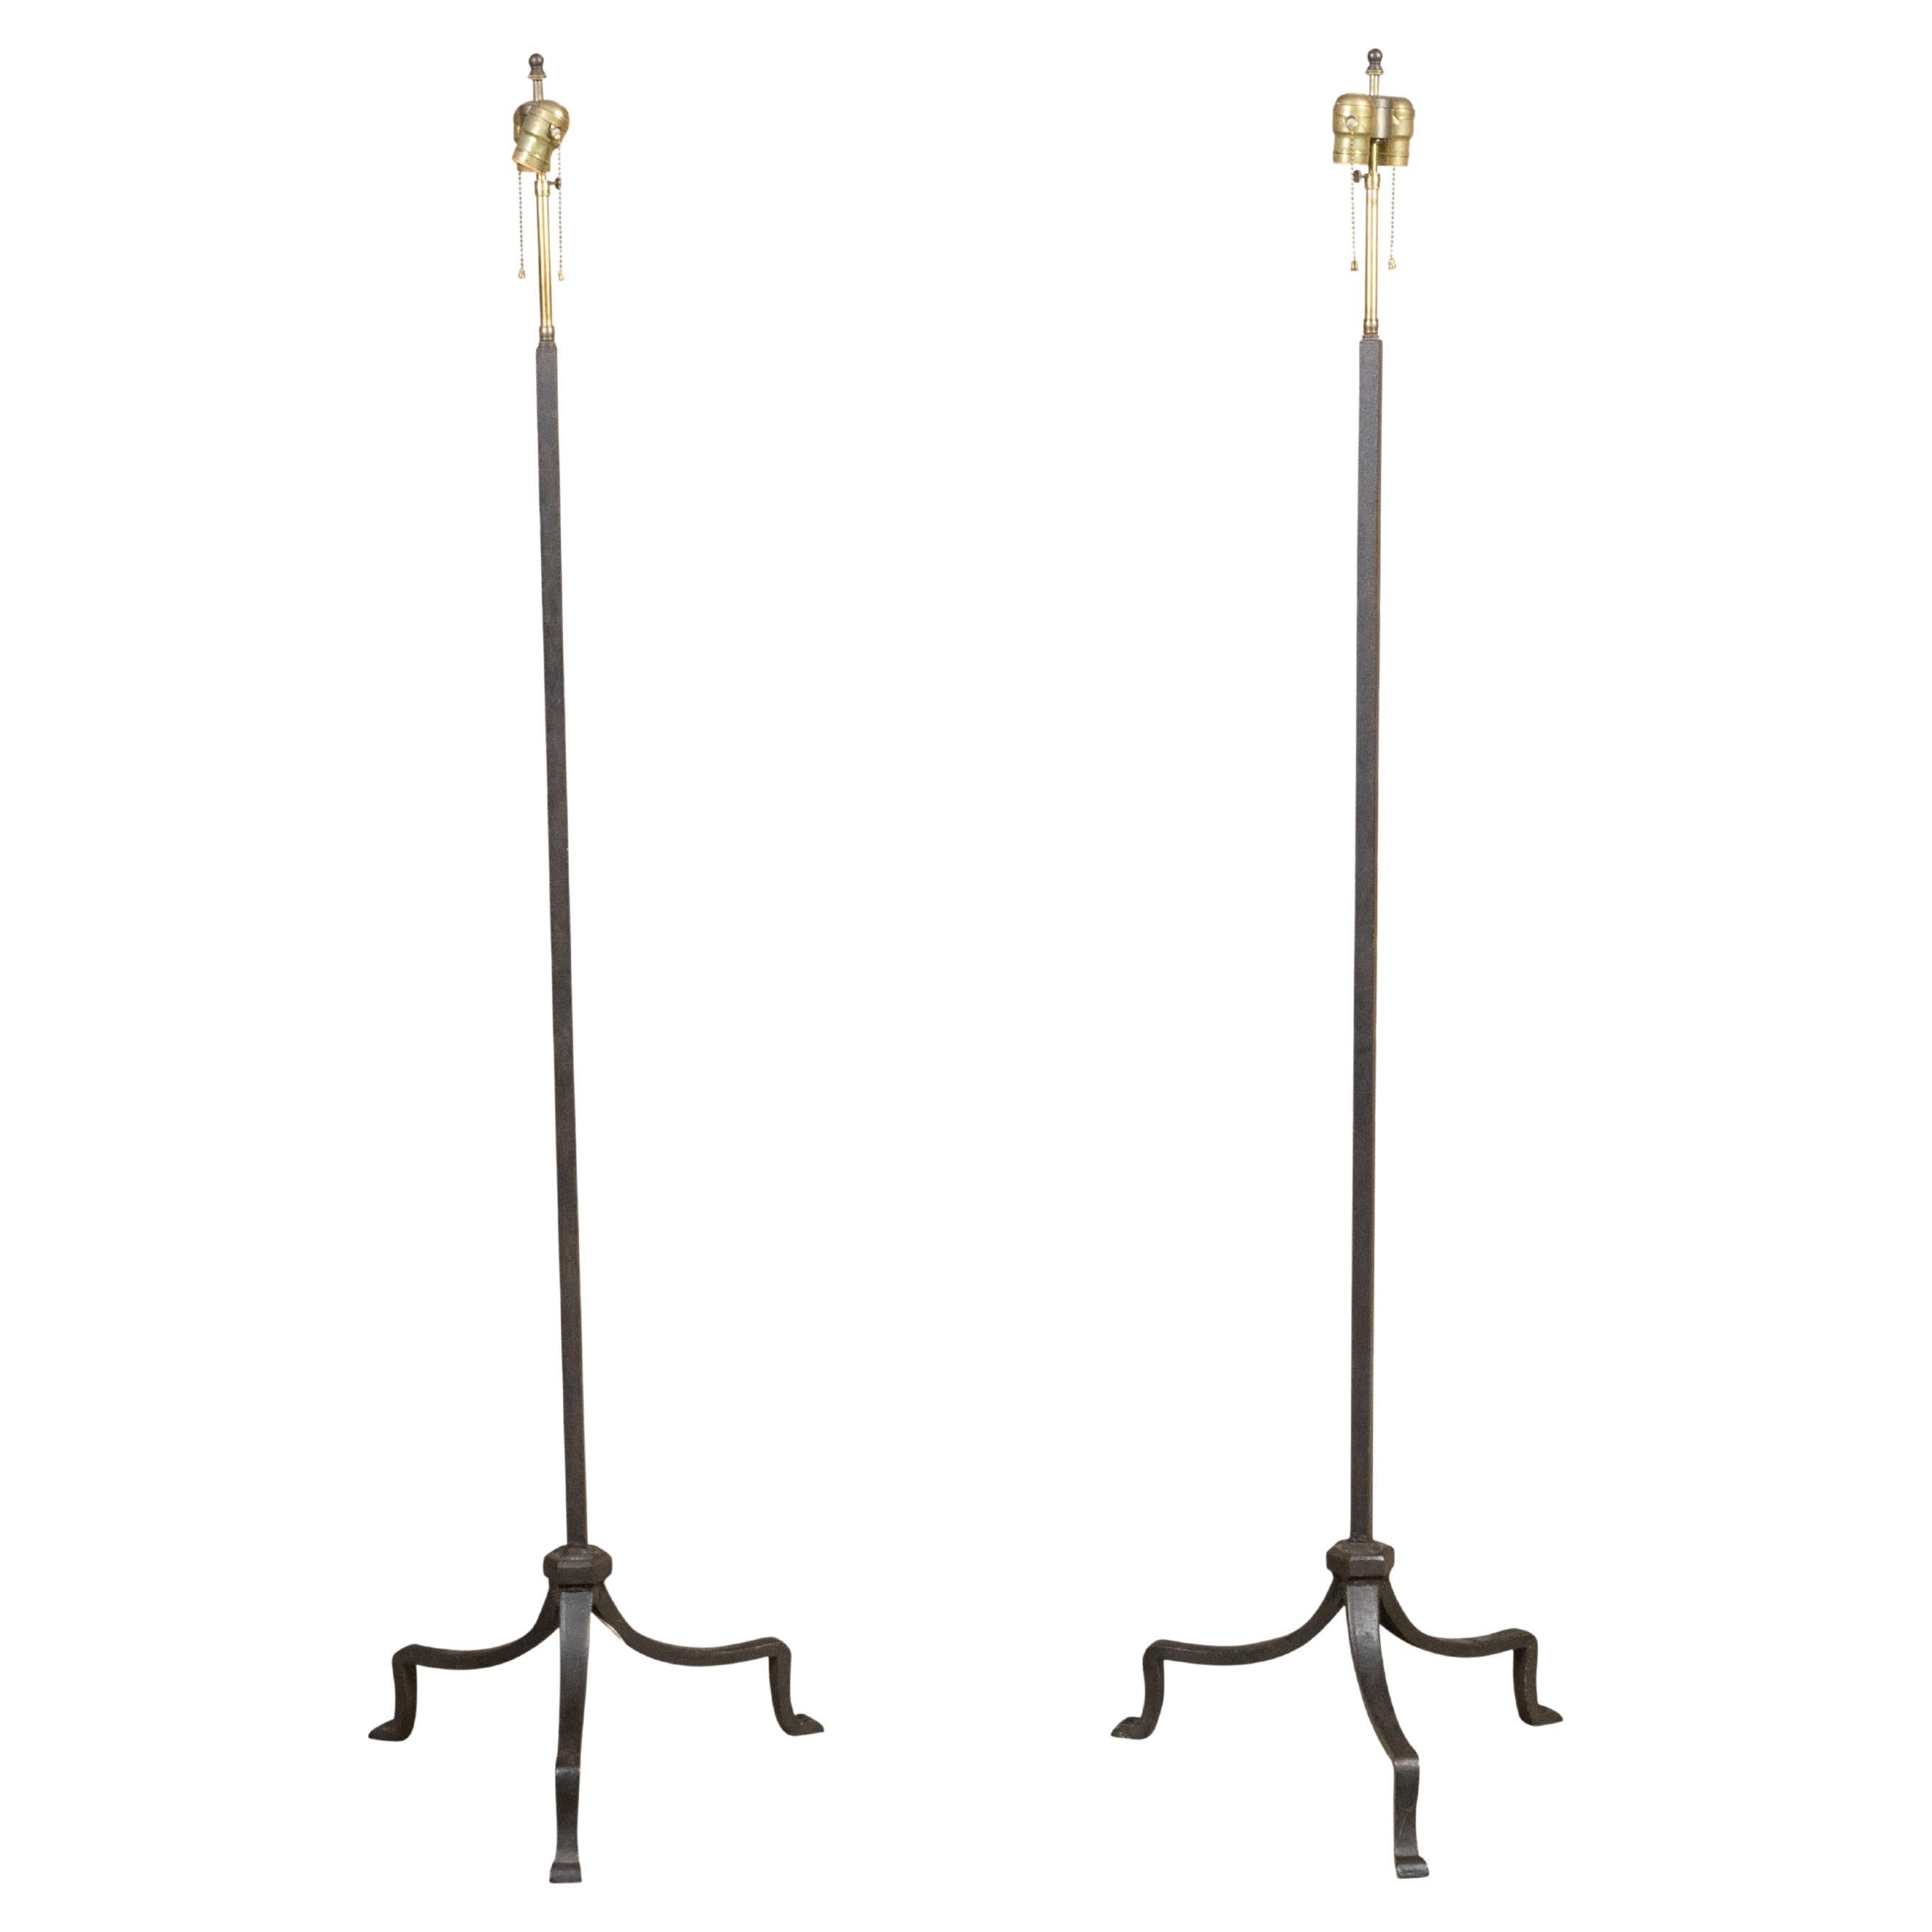 Pair of French Midcentury Iron Two-Light Floor Lamps with Tripod Bases